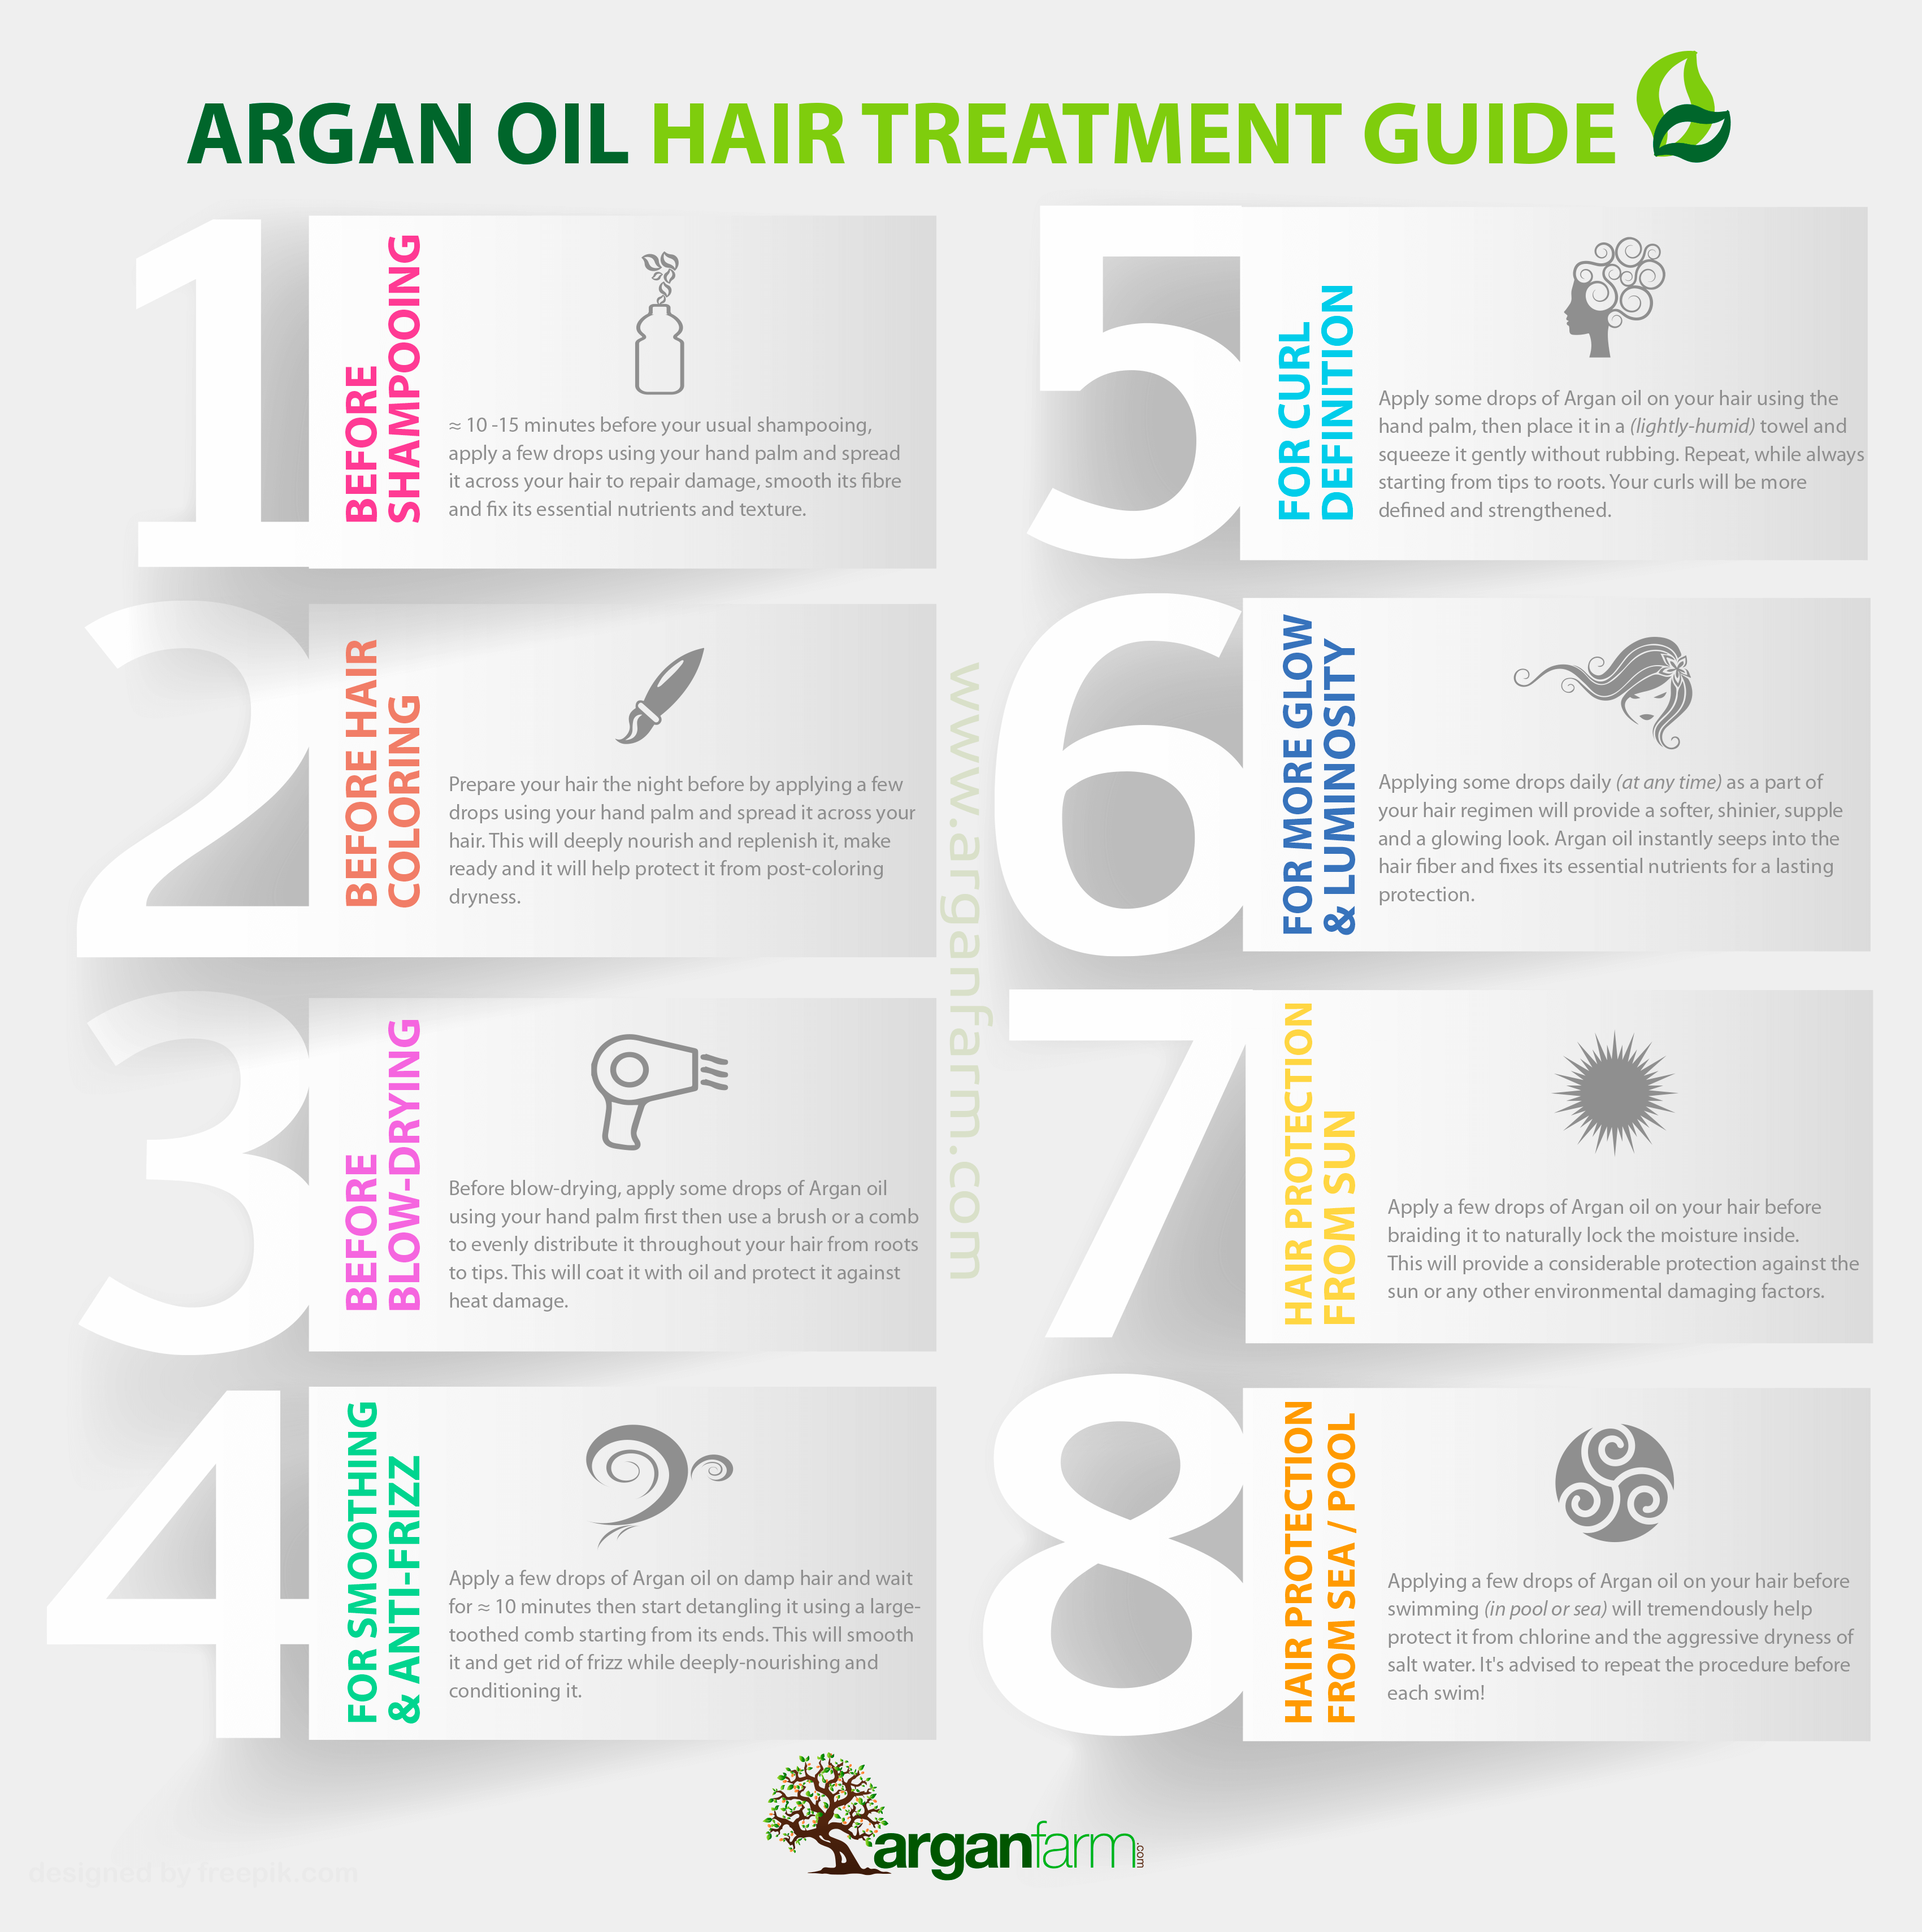 Argan Oil Hairtreatment - The Definitiv Guide Infographic